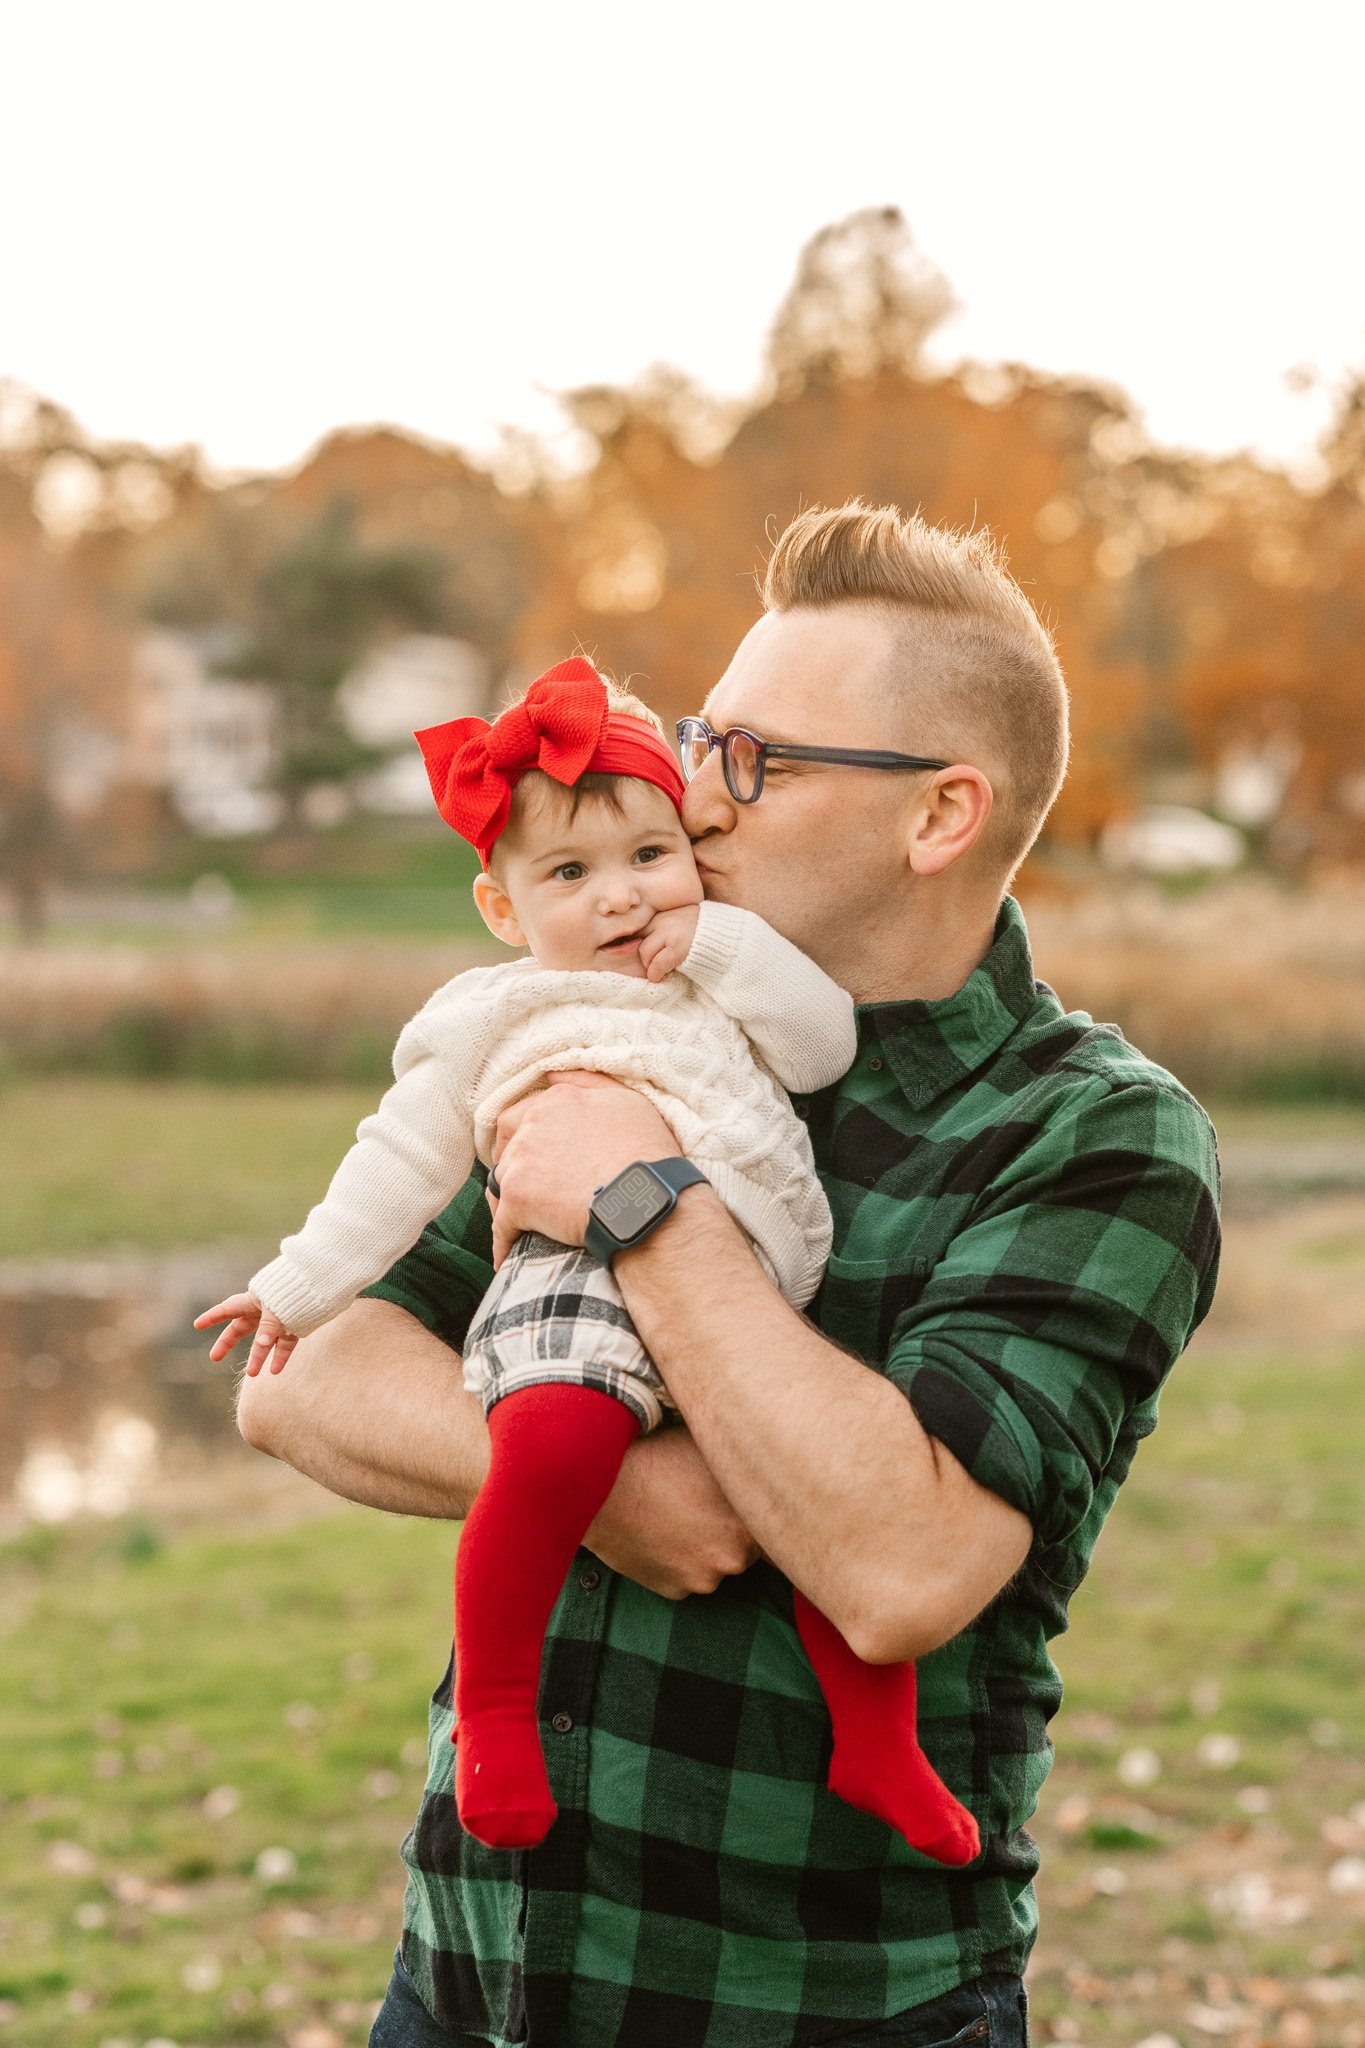  A father kisses his little girl's cheek during fall family pictures in New Jersey with Nicole Hawkins Photography. baby girl #NicoleHawkinsPhotography #NicoleHawkinsFamily #fallfamilyphotos #fallphotos #familyphotographerNJ #NJfallfamilypics 